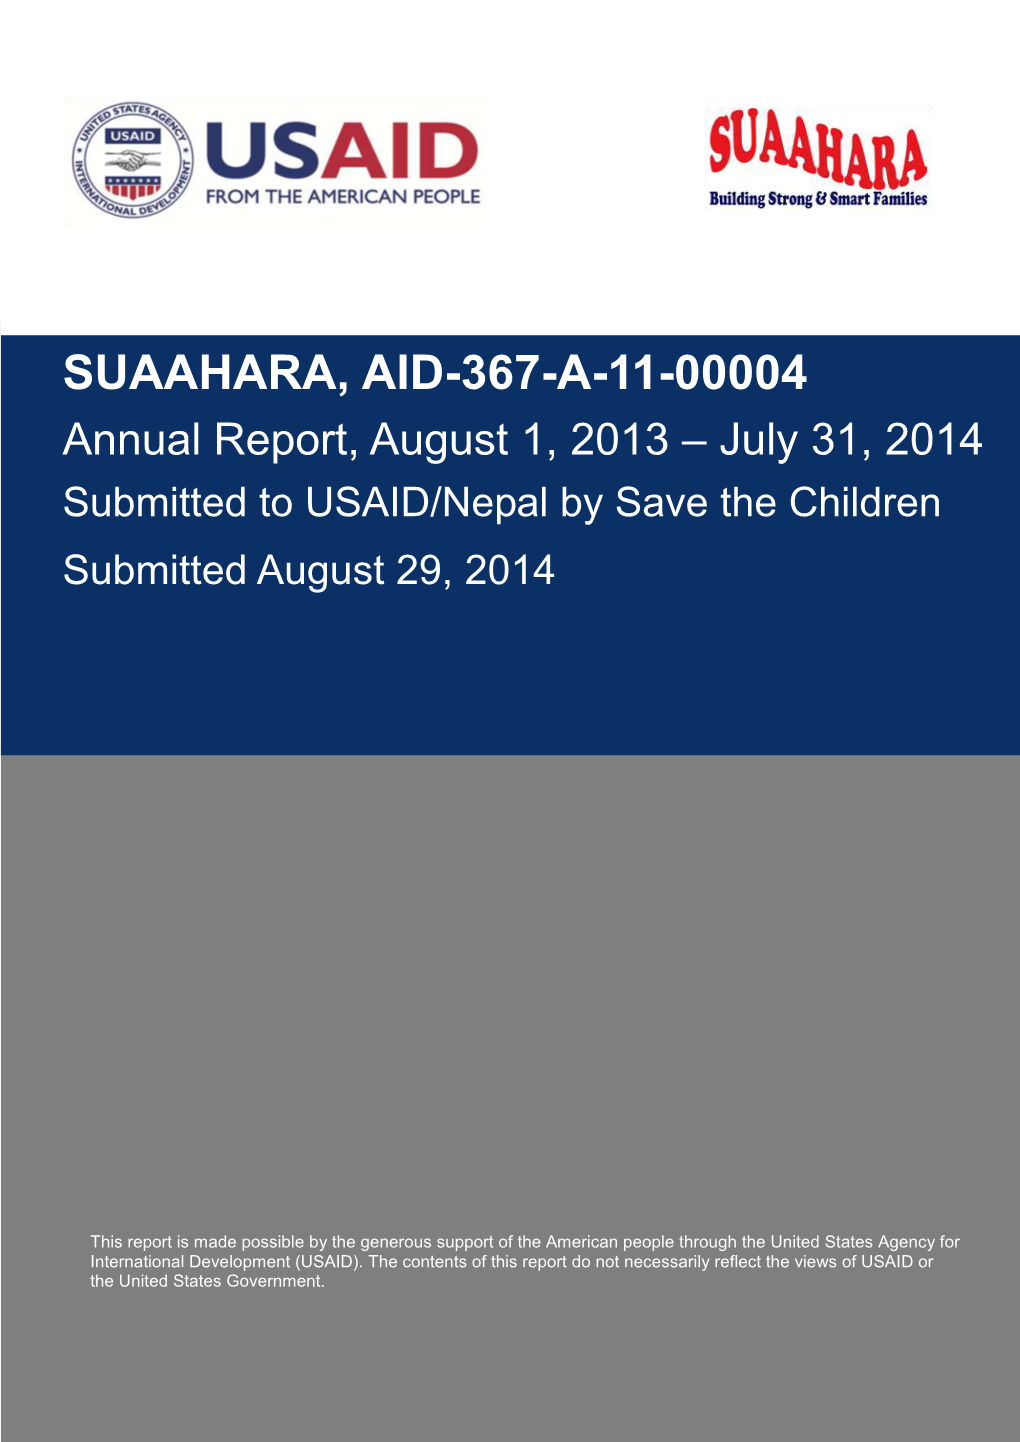 Suaahara, AID-367-A-11-00004 Annual Report, August 1, 2013 to July 31, 2014